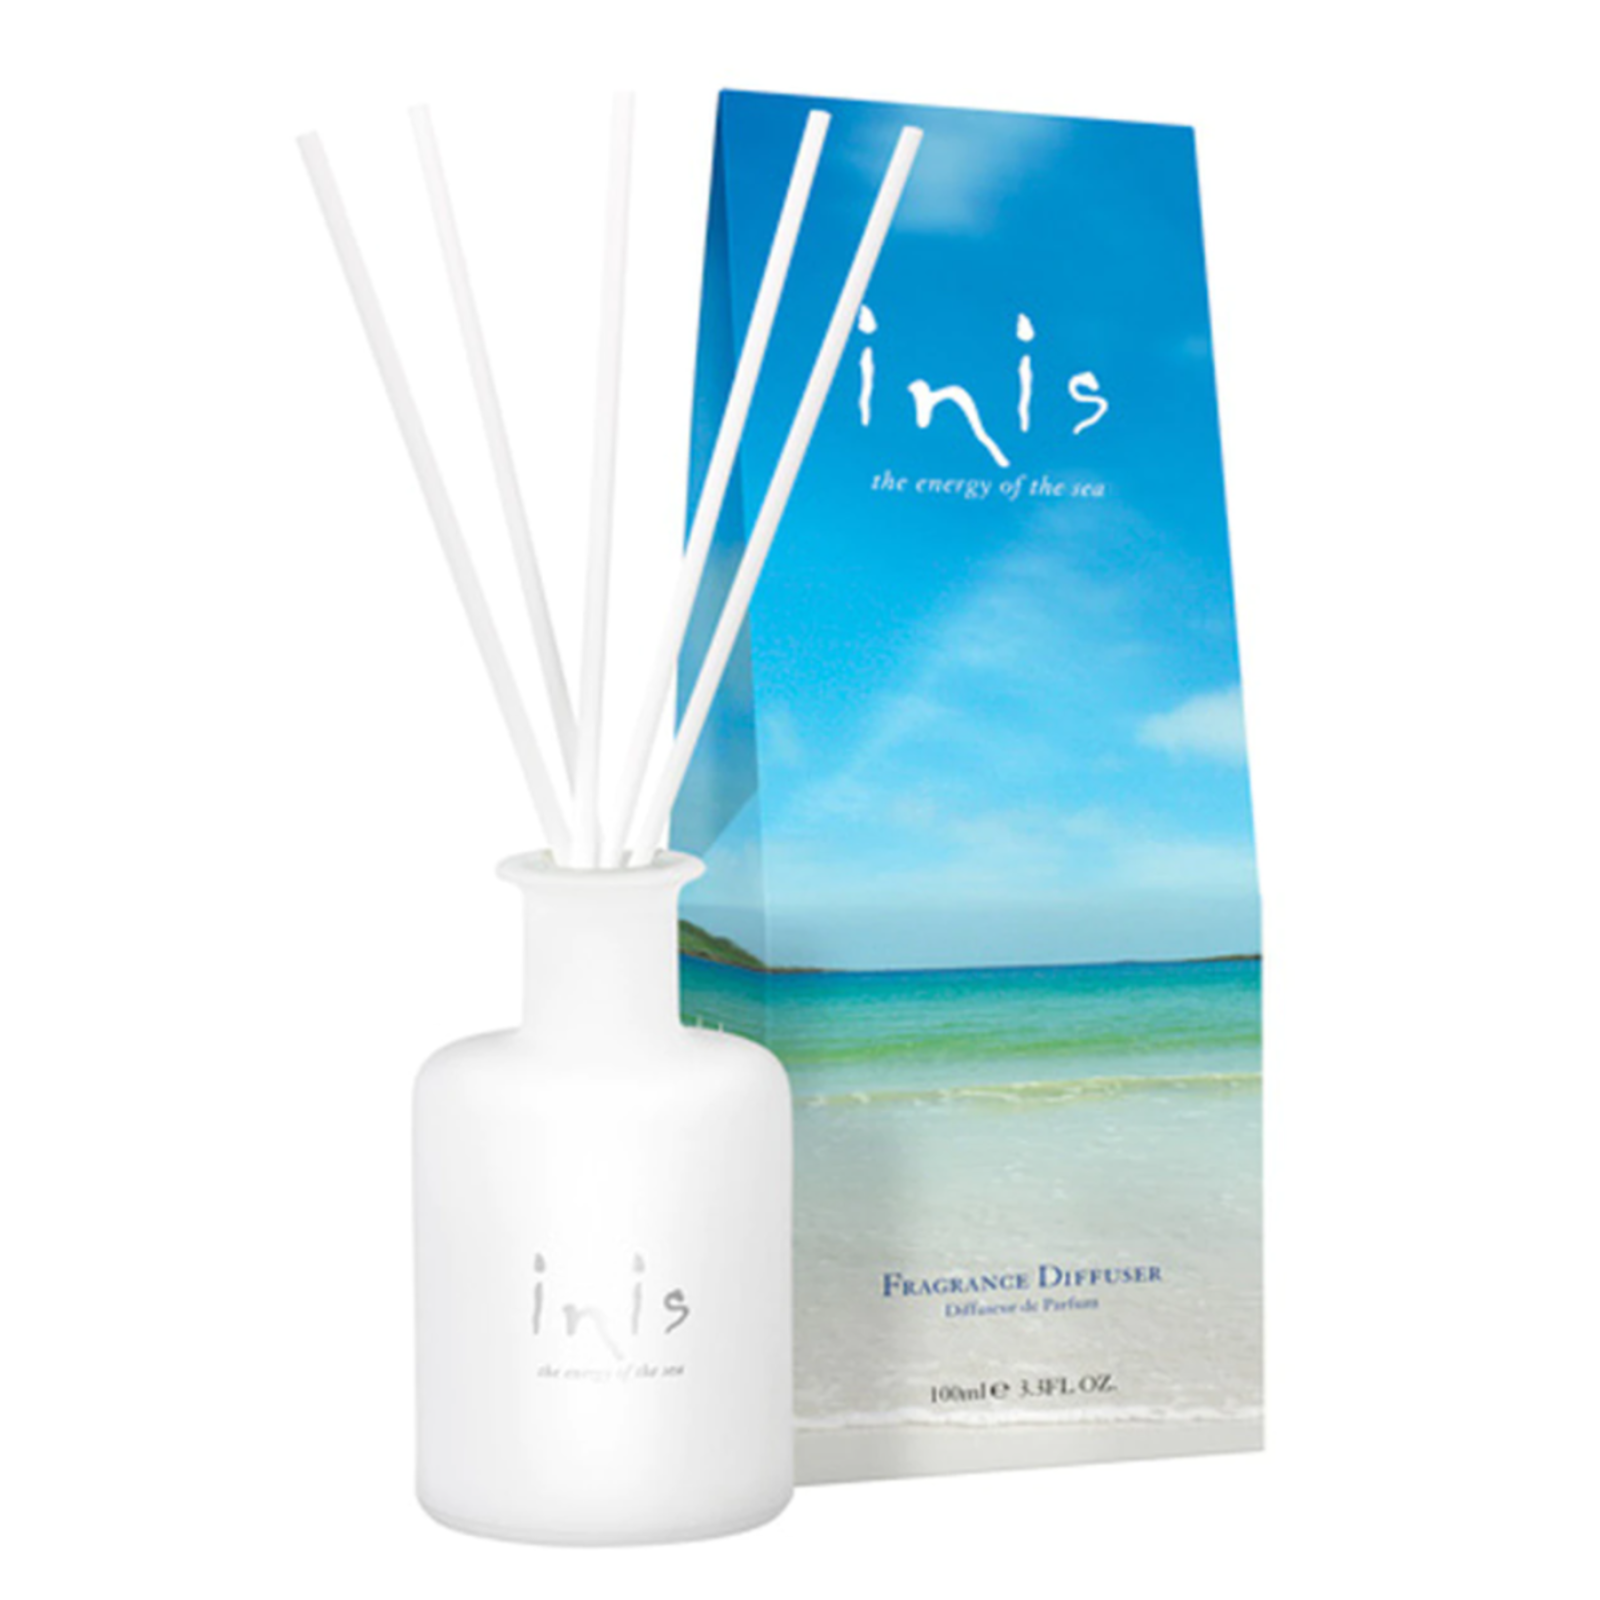 Inis Inis Fragrance Diffuser    8017222 loading=